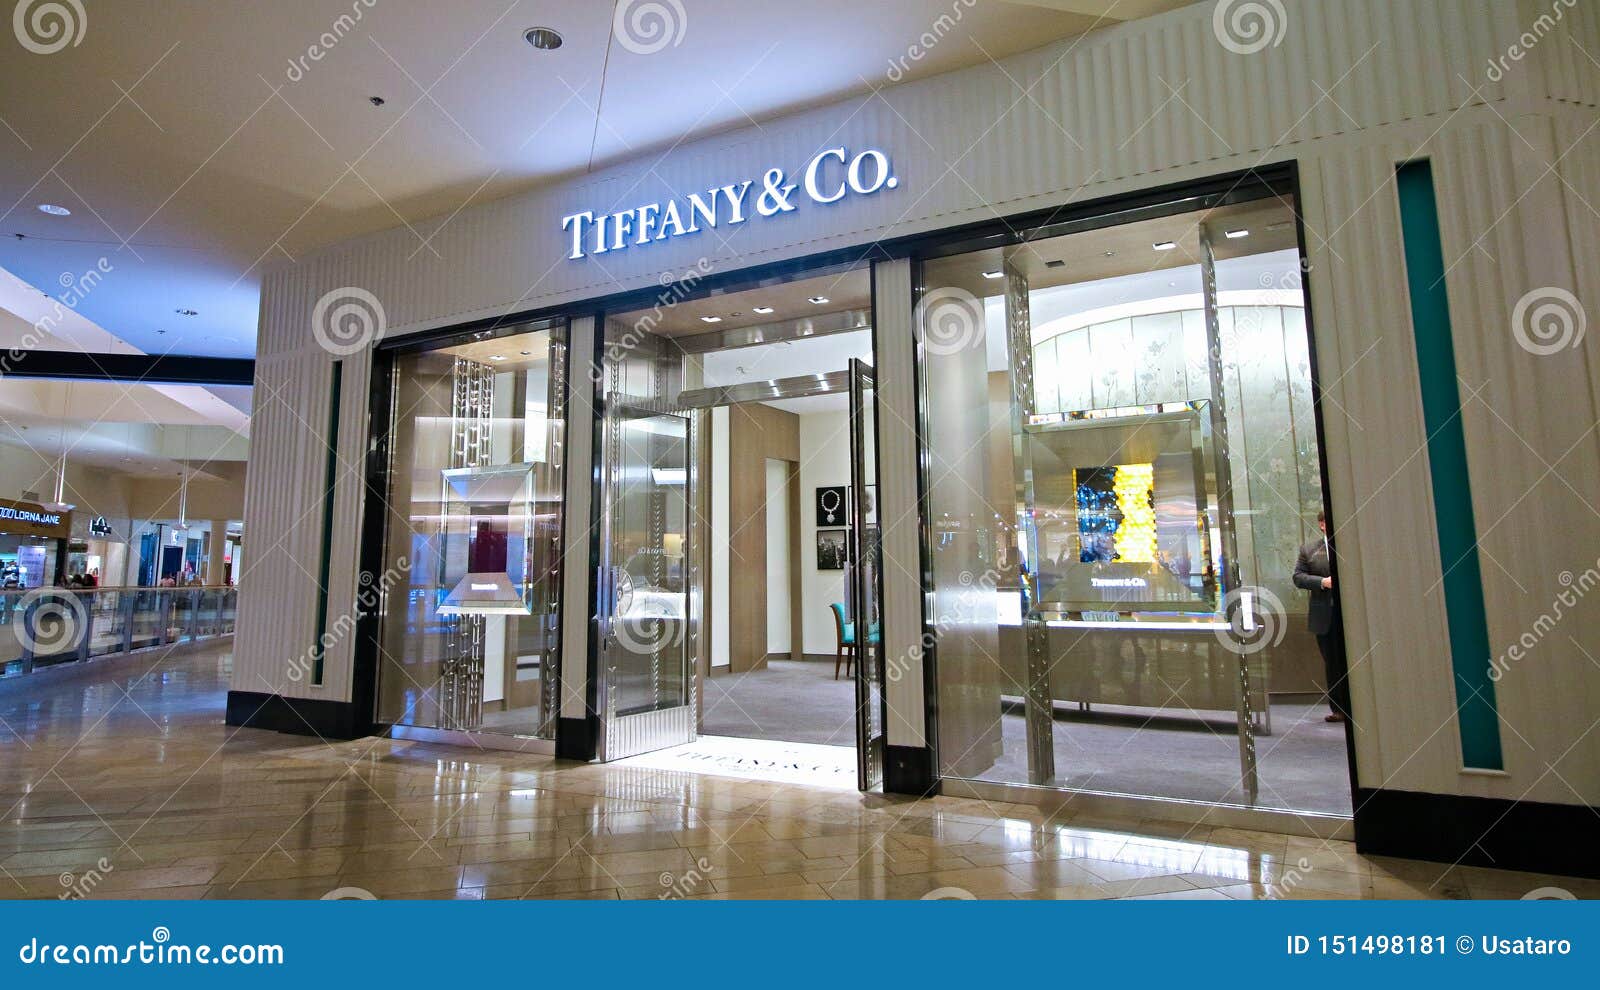 tiffany usa outlet